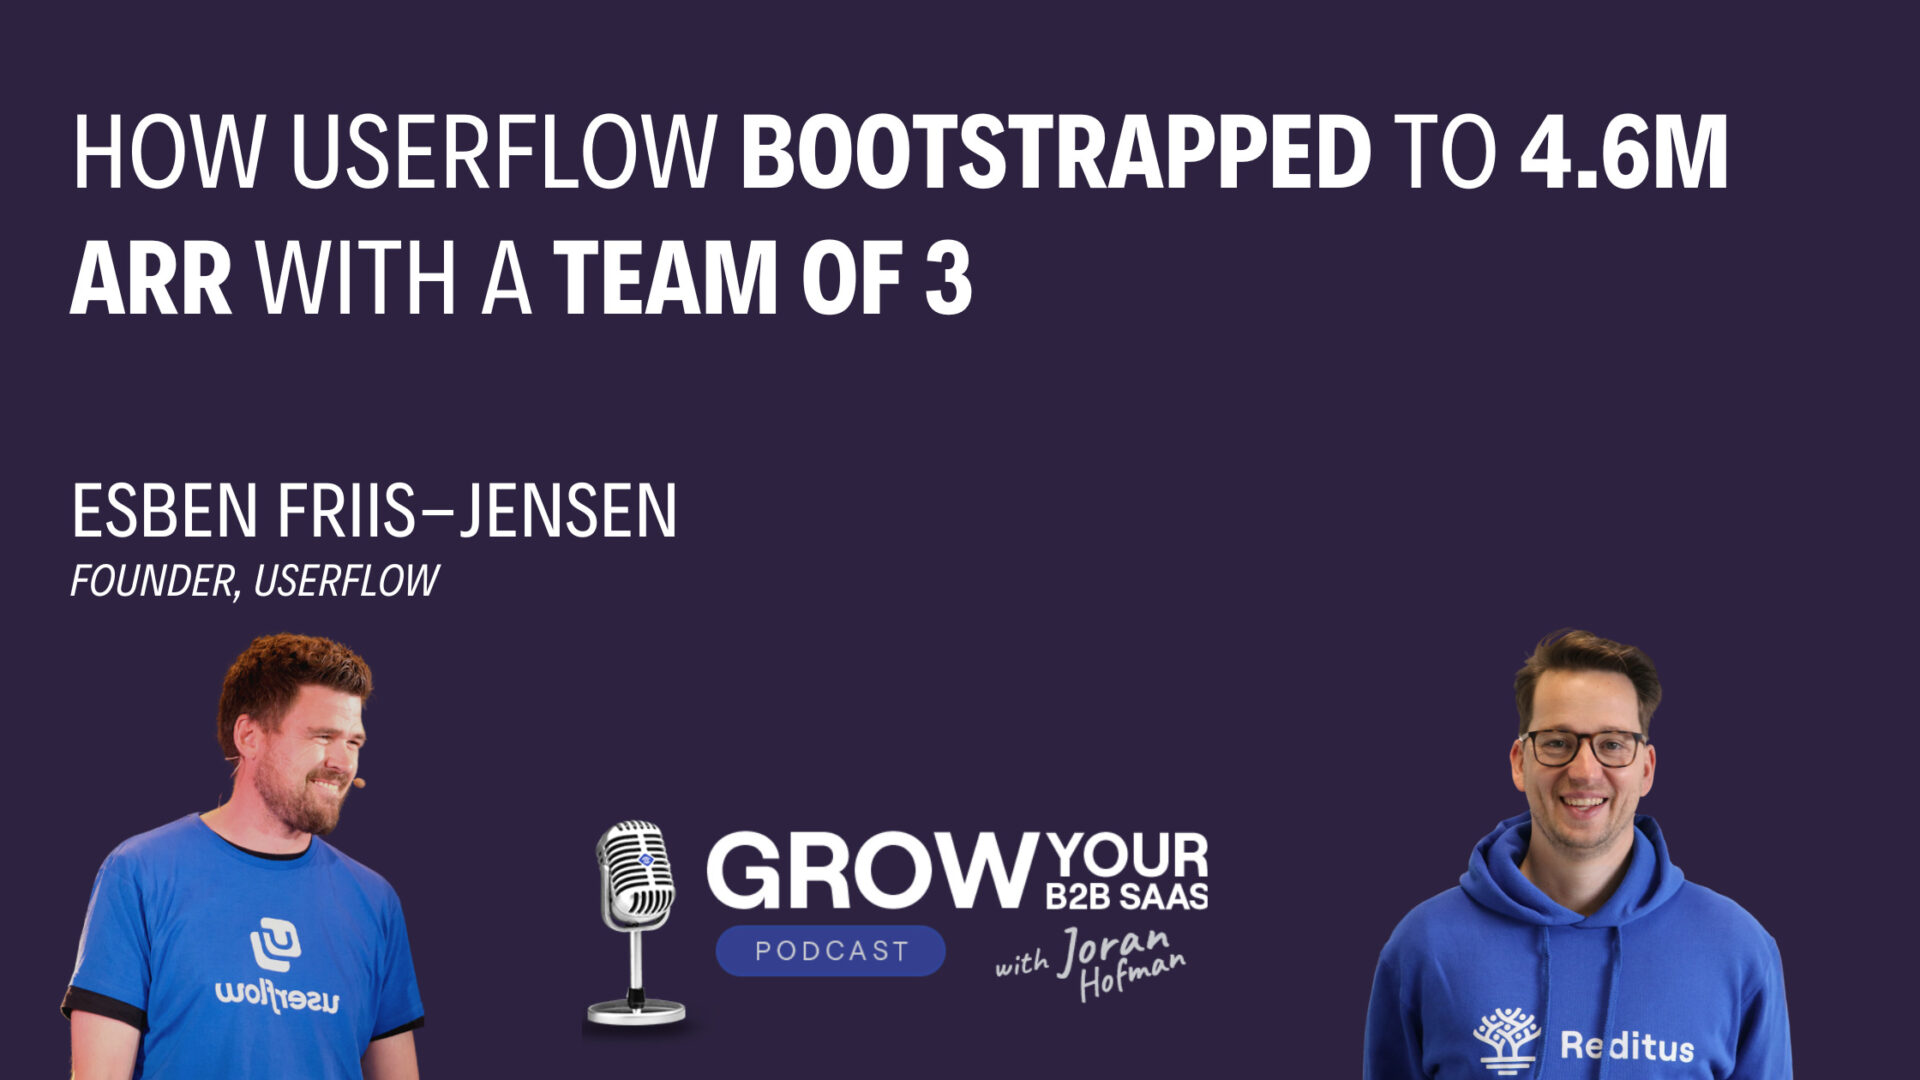 S4E3 – How Userflow grew to 4.6M ARR with a team of 3 With Esben Friis-Jensen